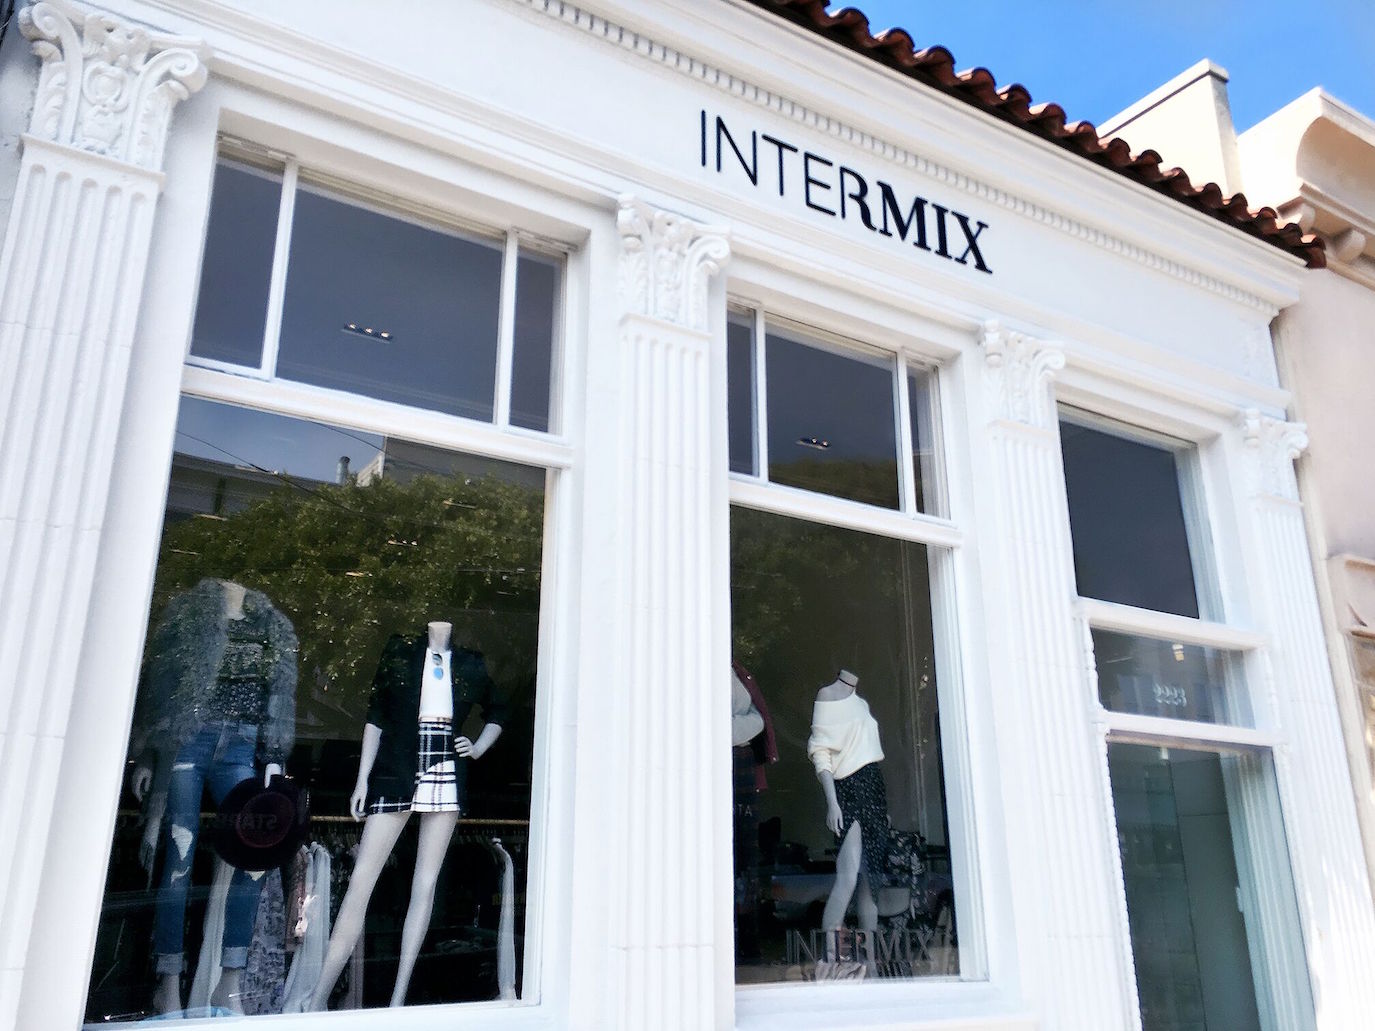 Intermix is now open on Fillmore Street